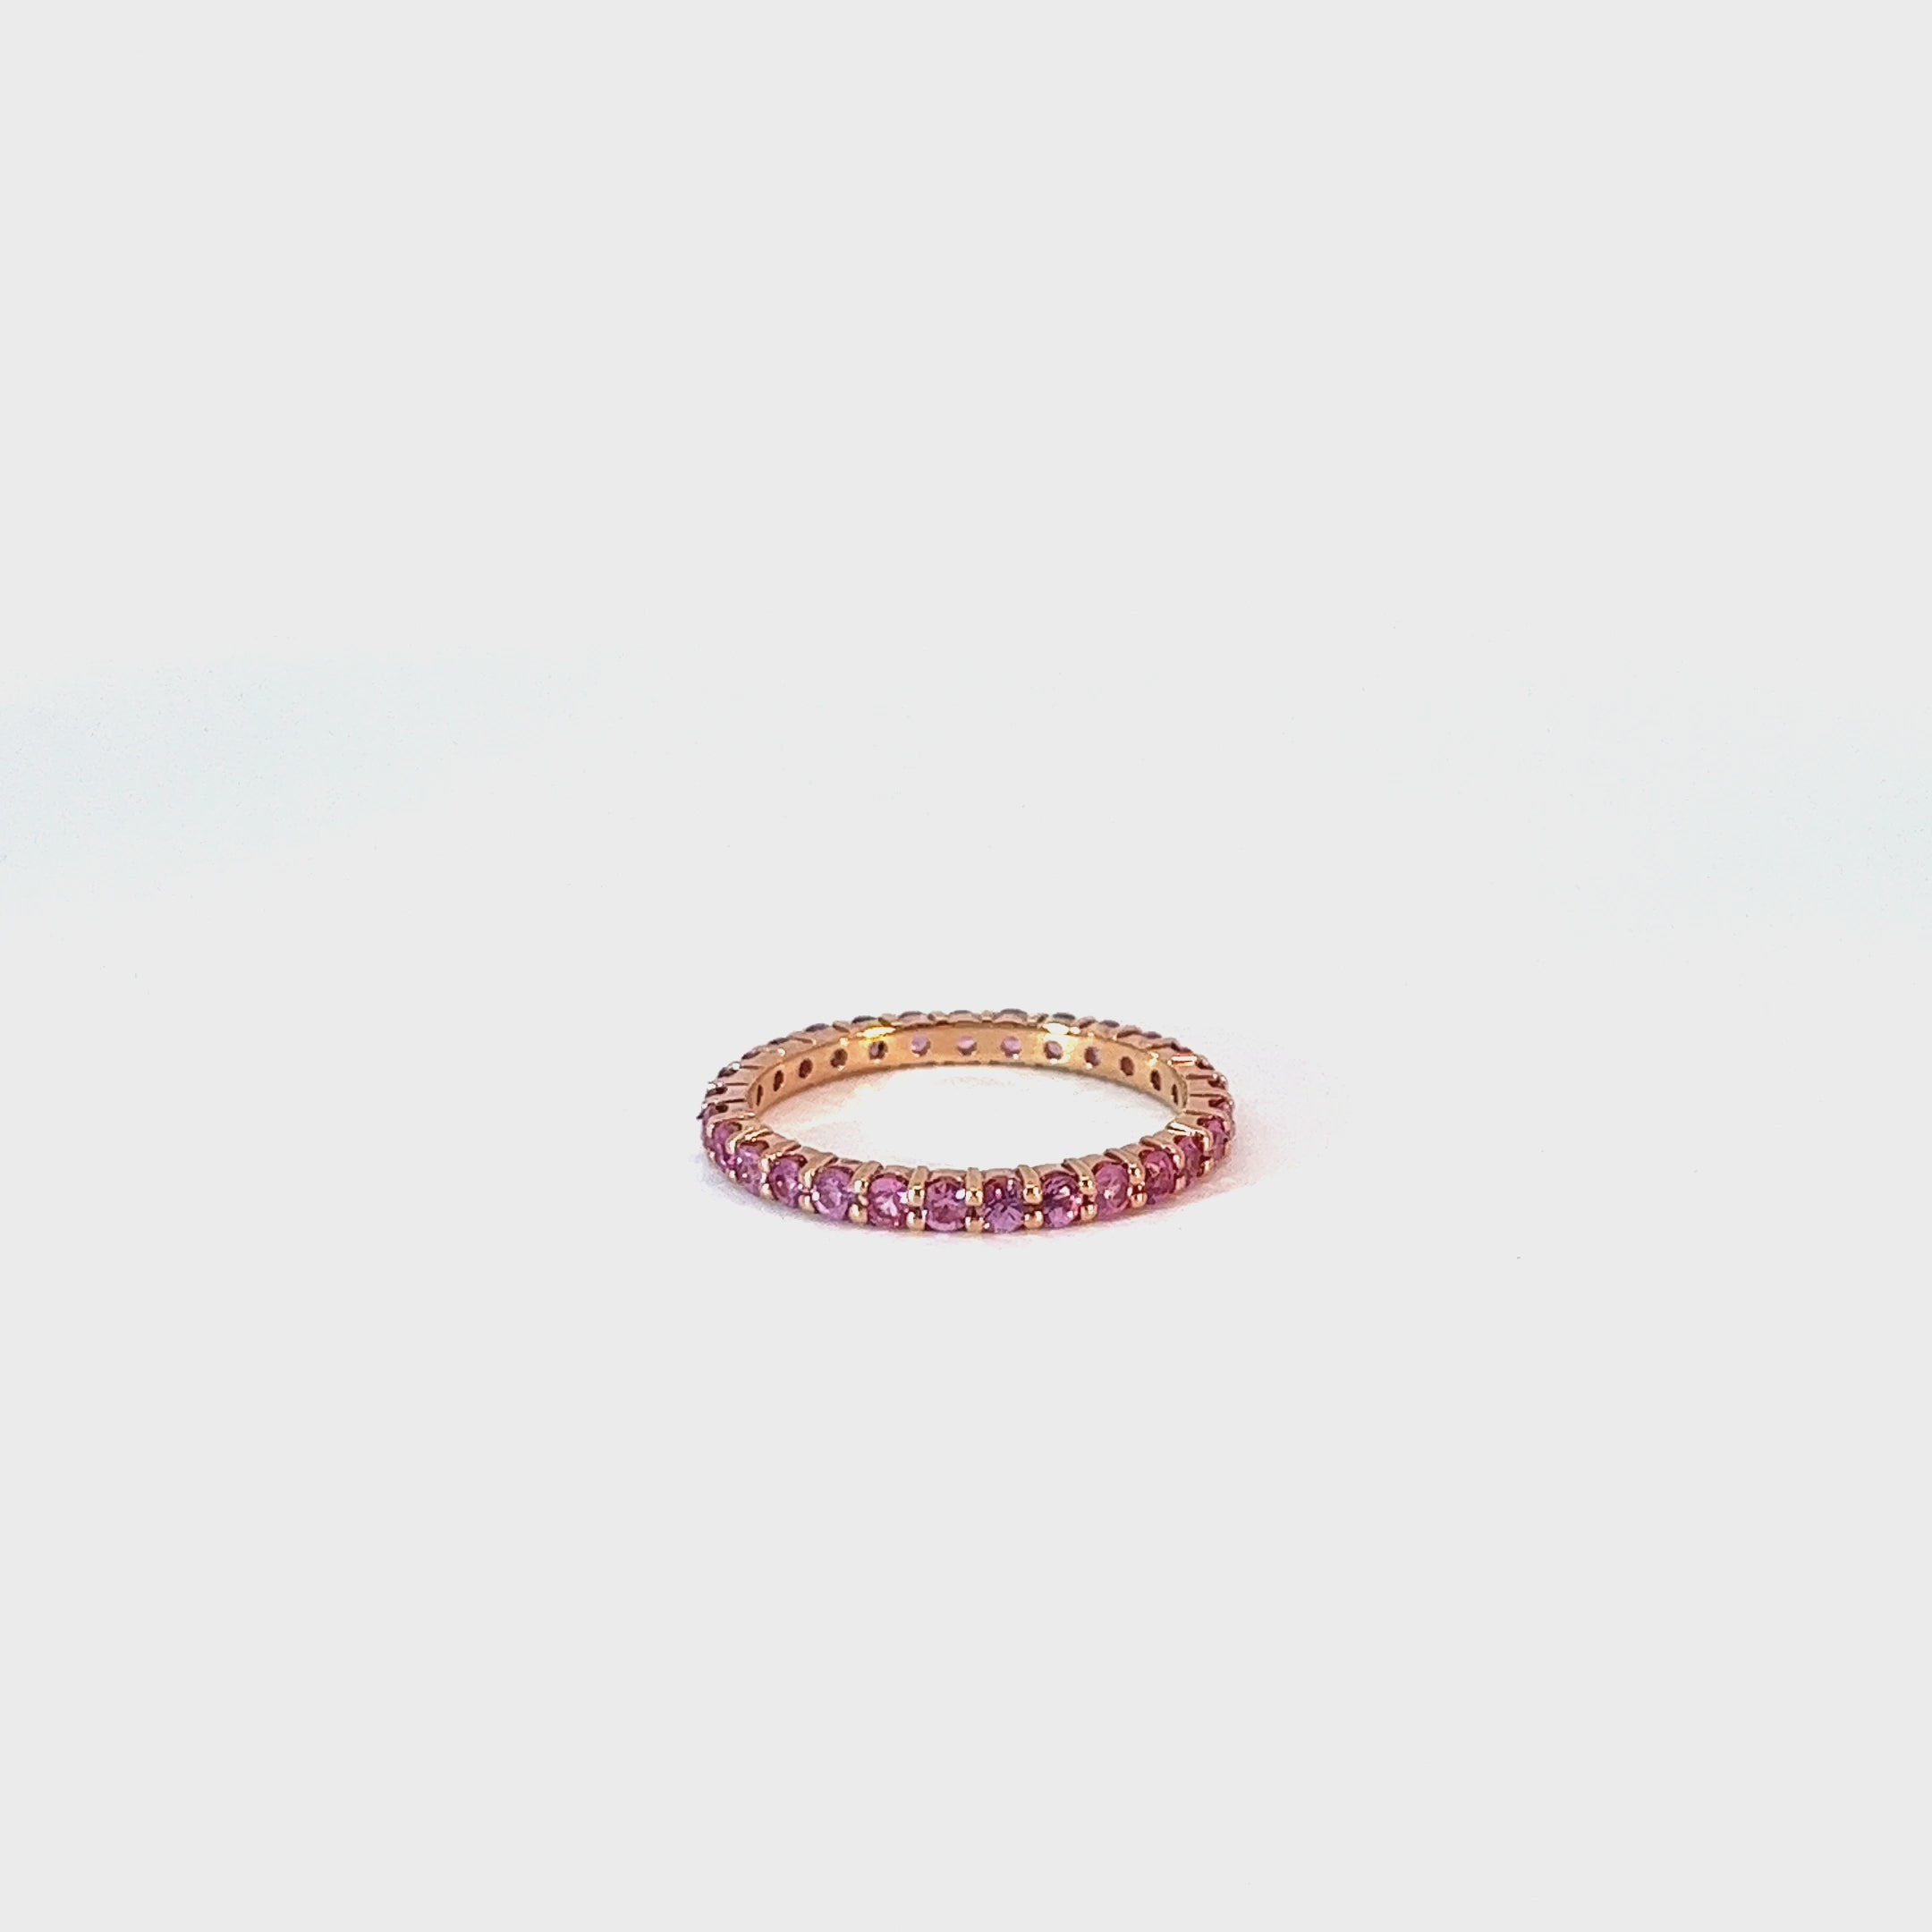 Ladies 14k Rose Gold Pink Sapphire Eternity Band Ring